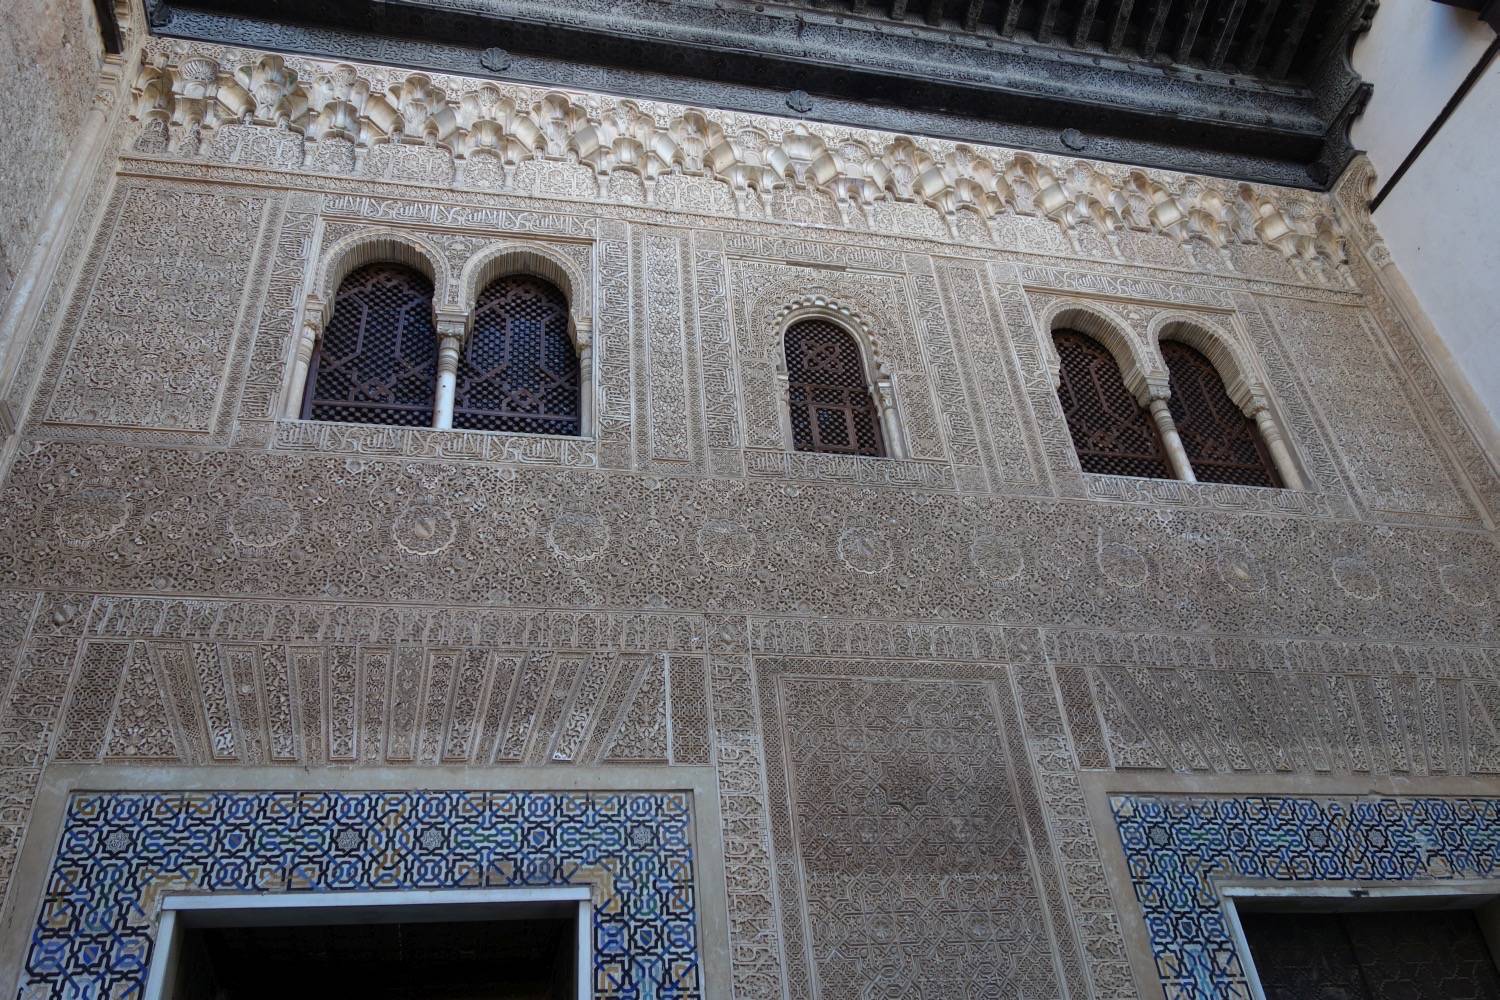 Interior view of the Mexuar, detail of carved stucco ornament on walls